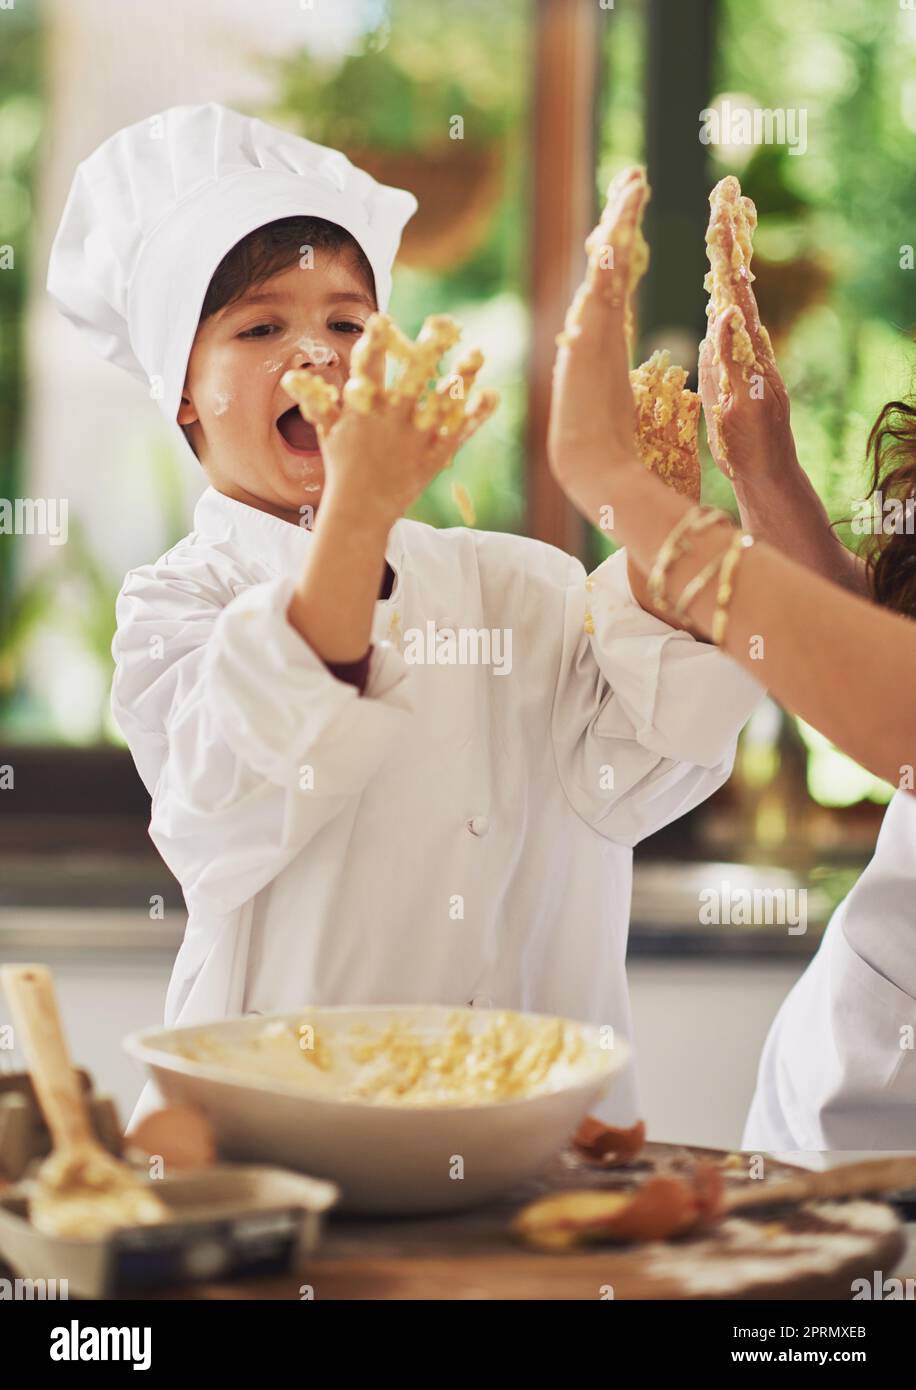 Joy in the kitchen. a mother and her young son baking together in the kitchen. Stock Photo